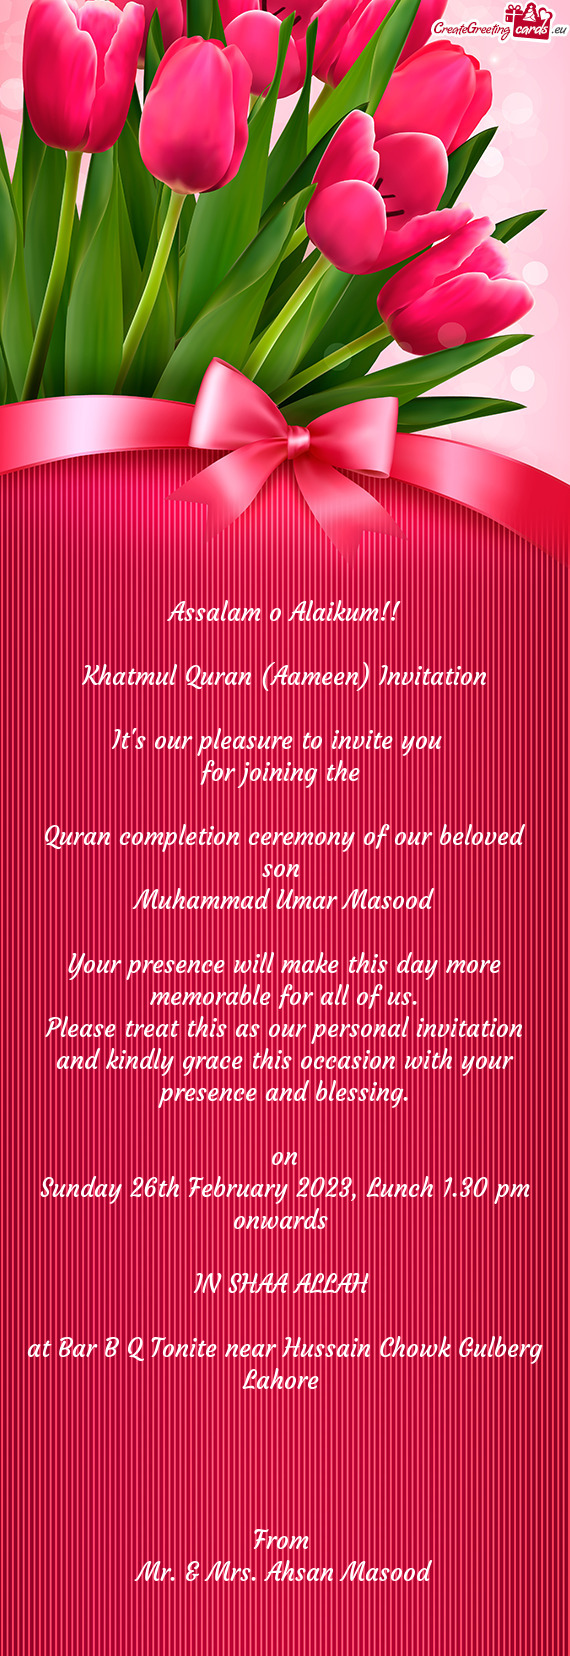 Oining the  Quran completion ceremony of our beloved son Muhammad Umar Masood Your presence